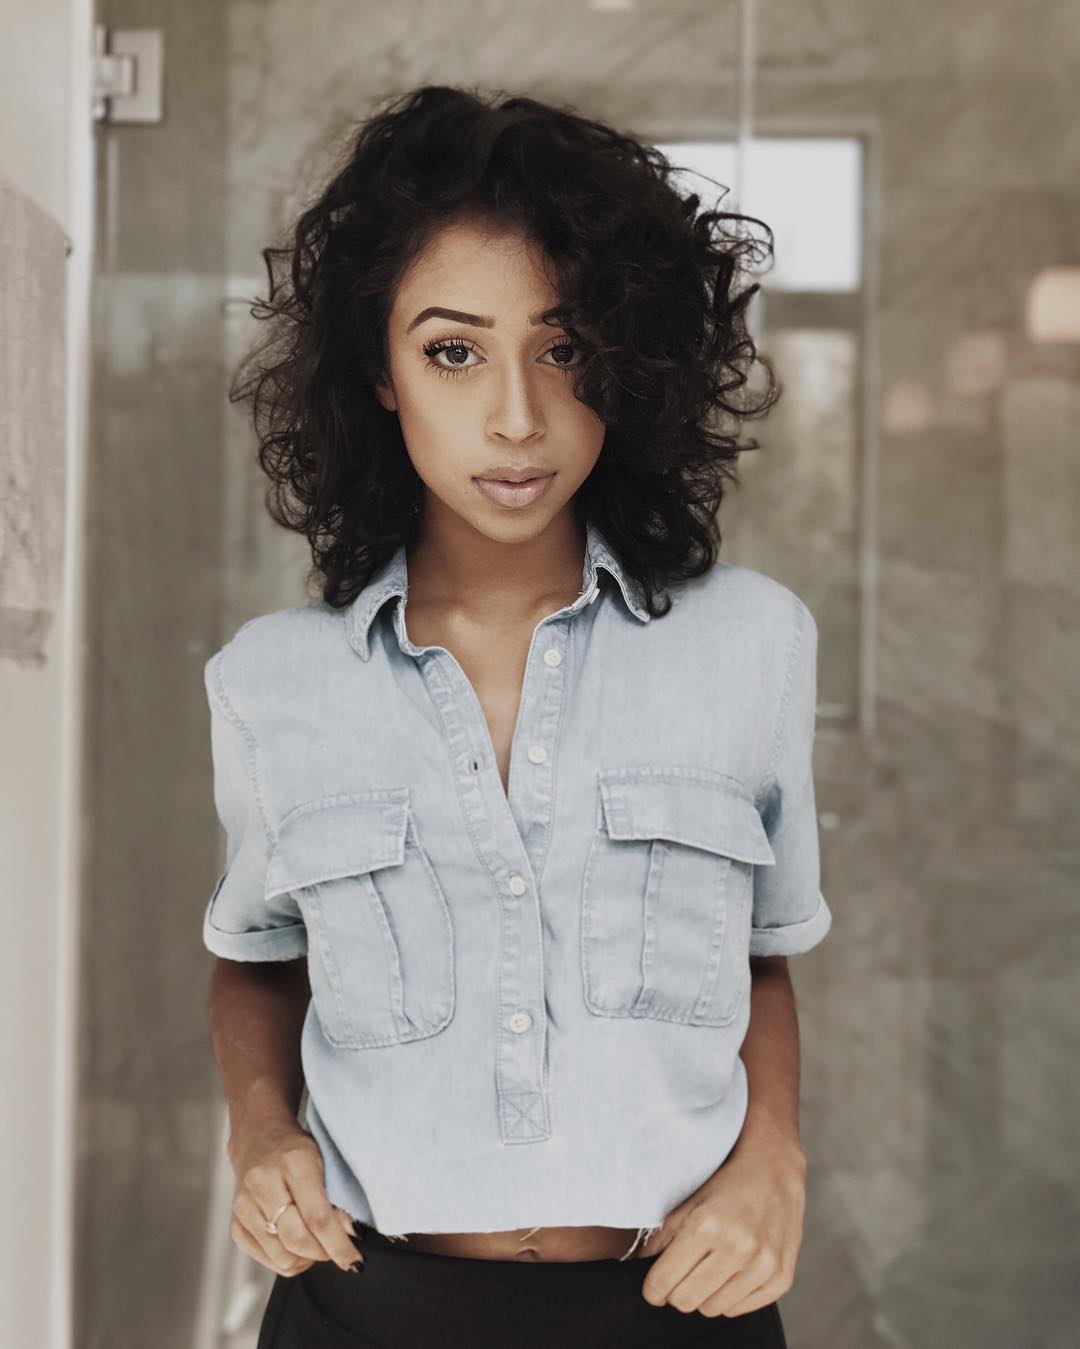 51 Sexy Liza Koshy Boobs Pictures Are A Charm For Her Fans 33